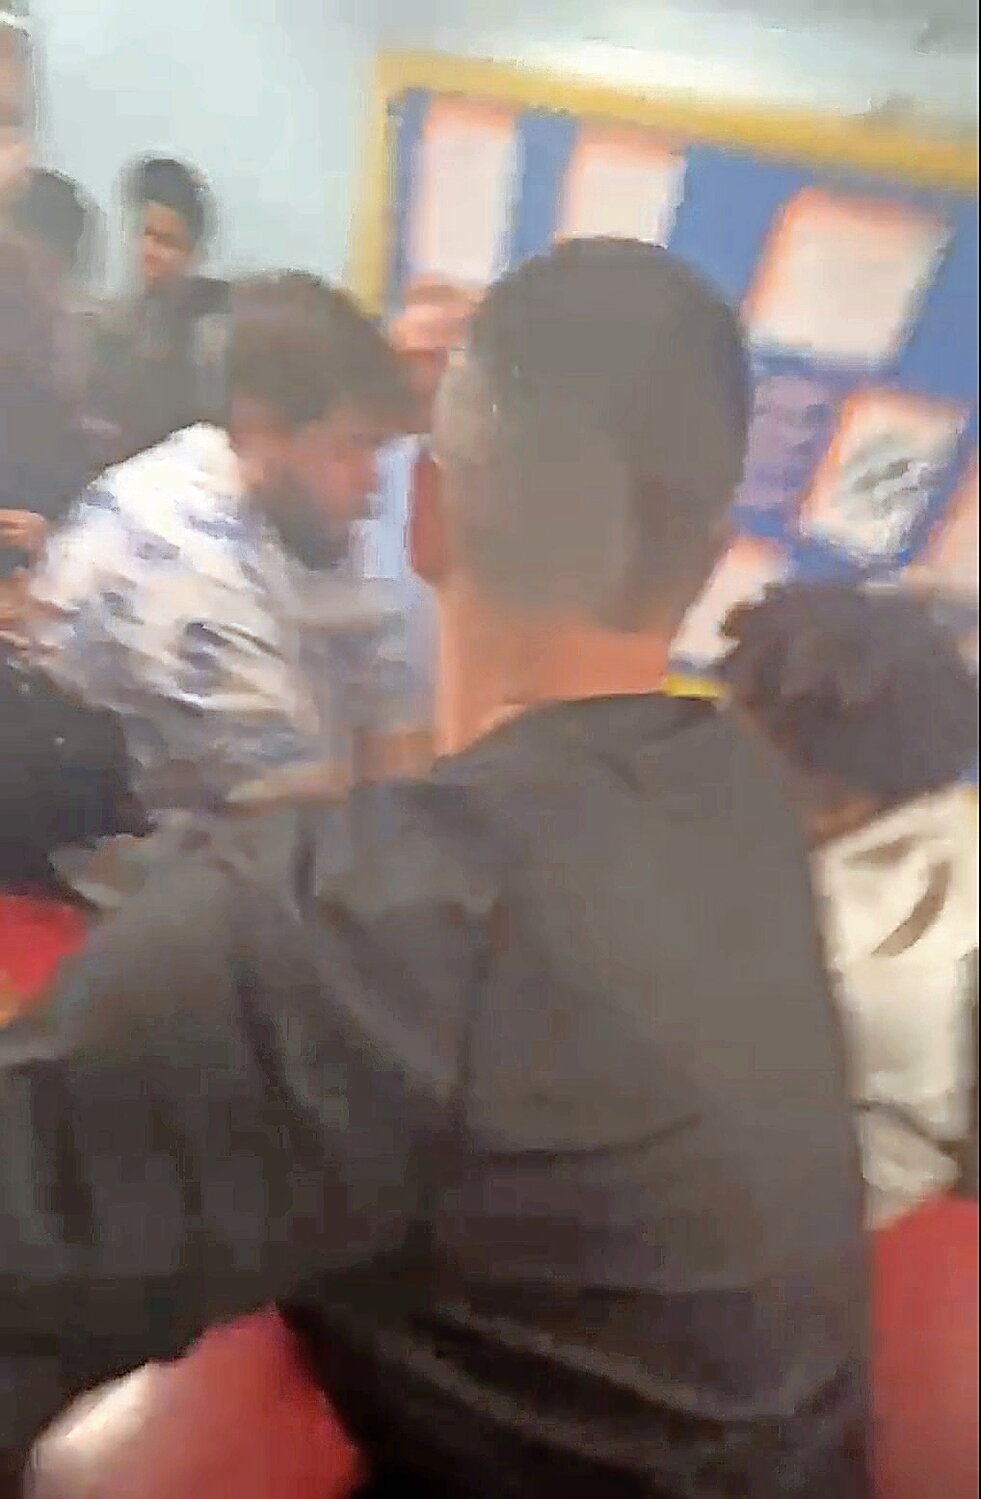 More video of other fights in the hallway at Riverdale / Kingsbridge Academy last school year showed students cheering on the two combatants as teachers try to break it up.